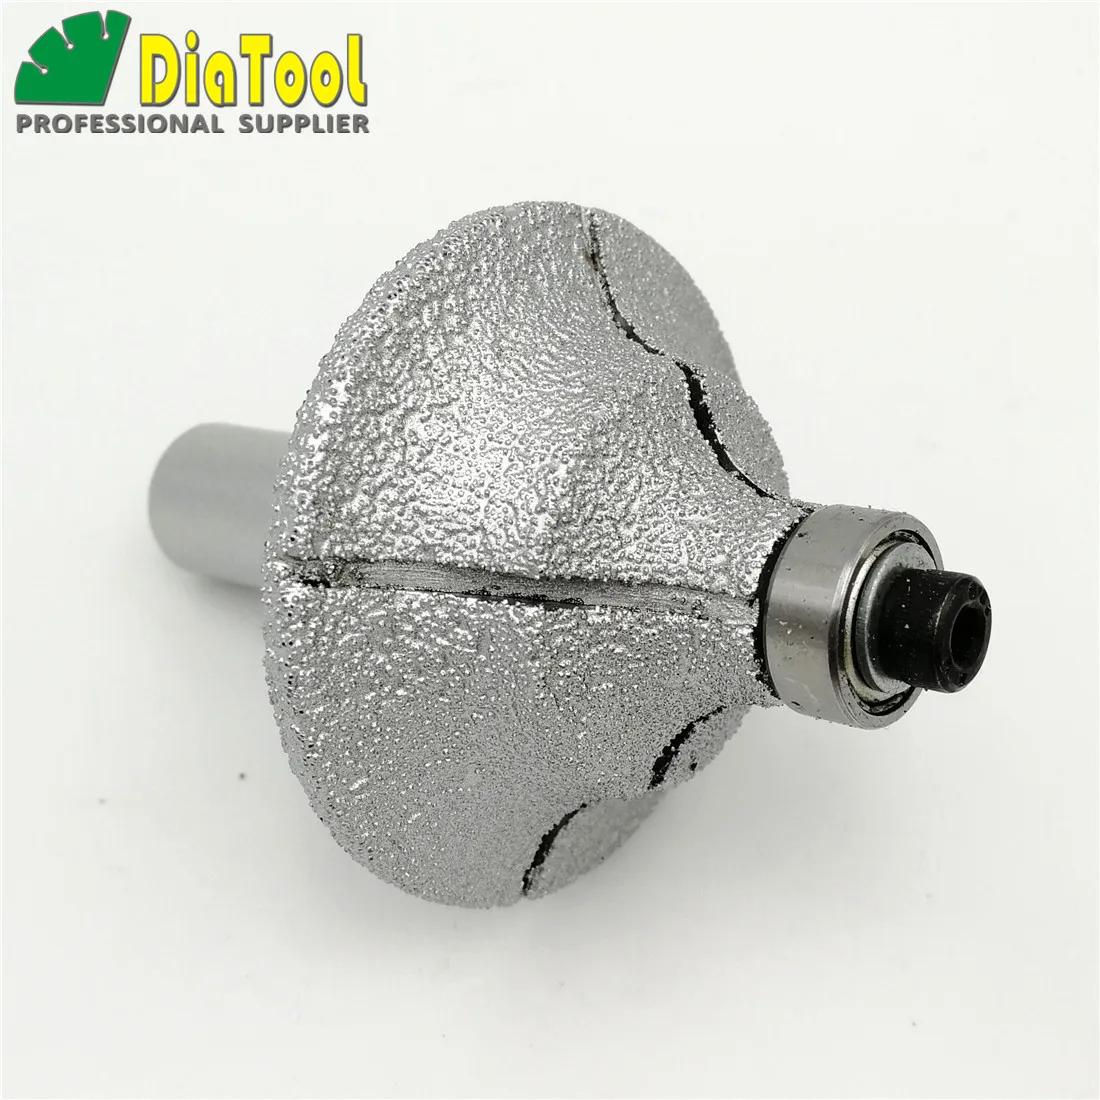 Metal Woods and Stone 1/2 Shank Vacuum Brazed Diamond Electric Router Bits Ball Bottom for Grinding Glass 